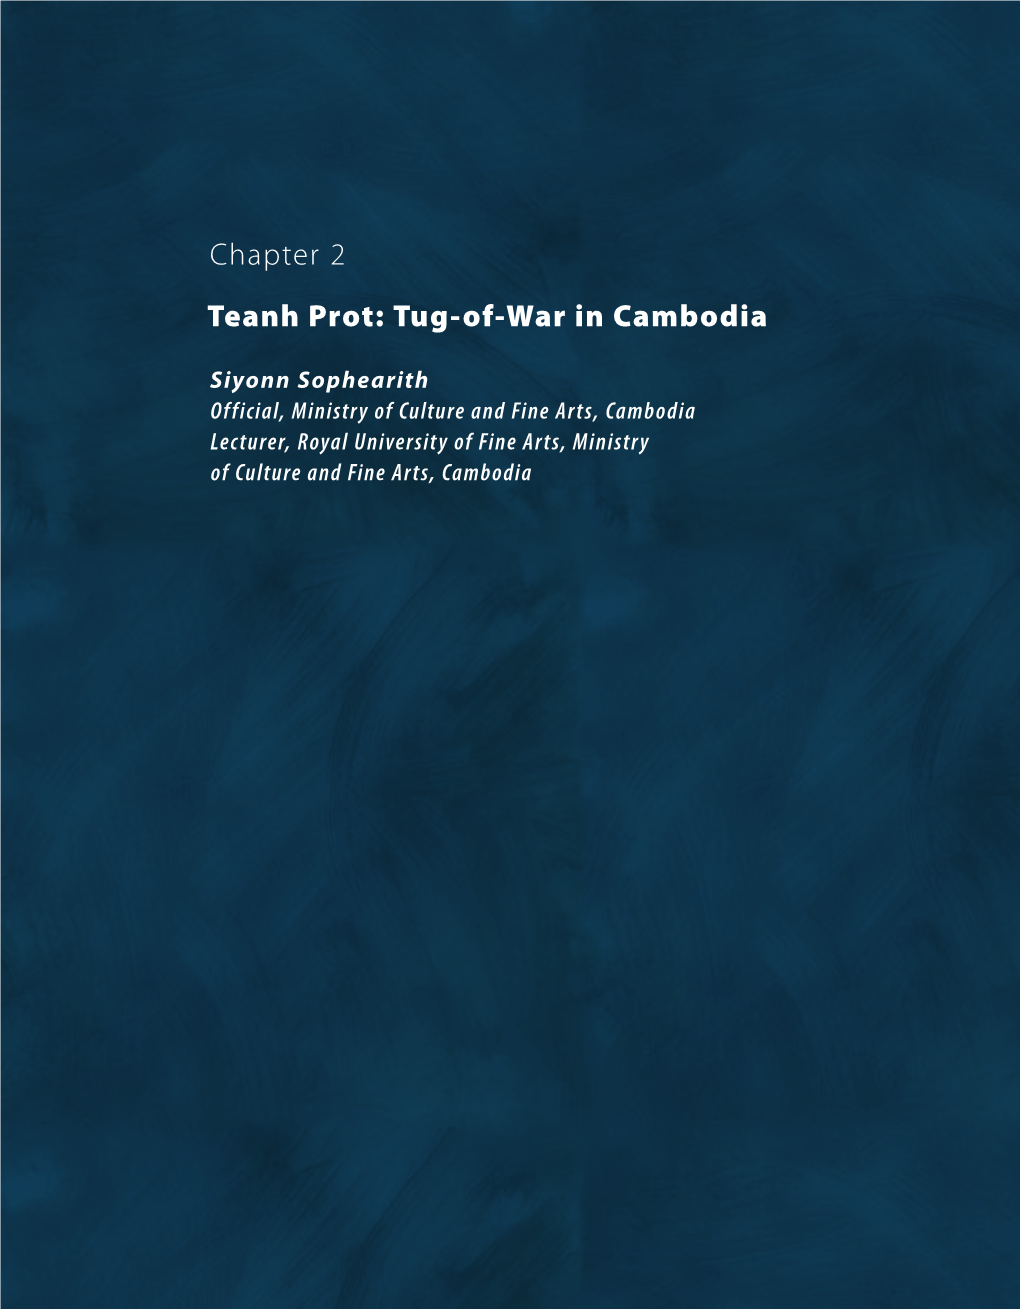 Chapter 2 Teanh Prot: Tug-Of-War in Cambodia